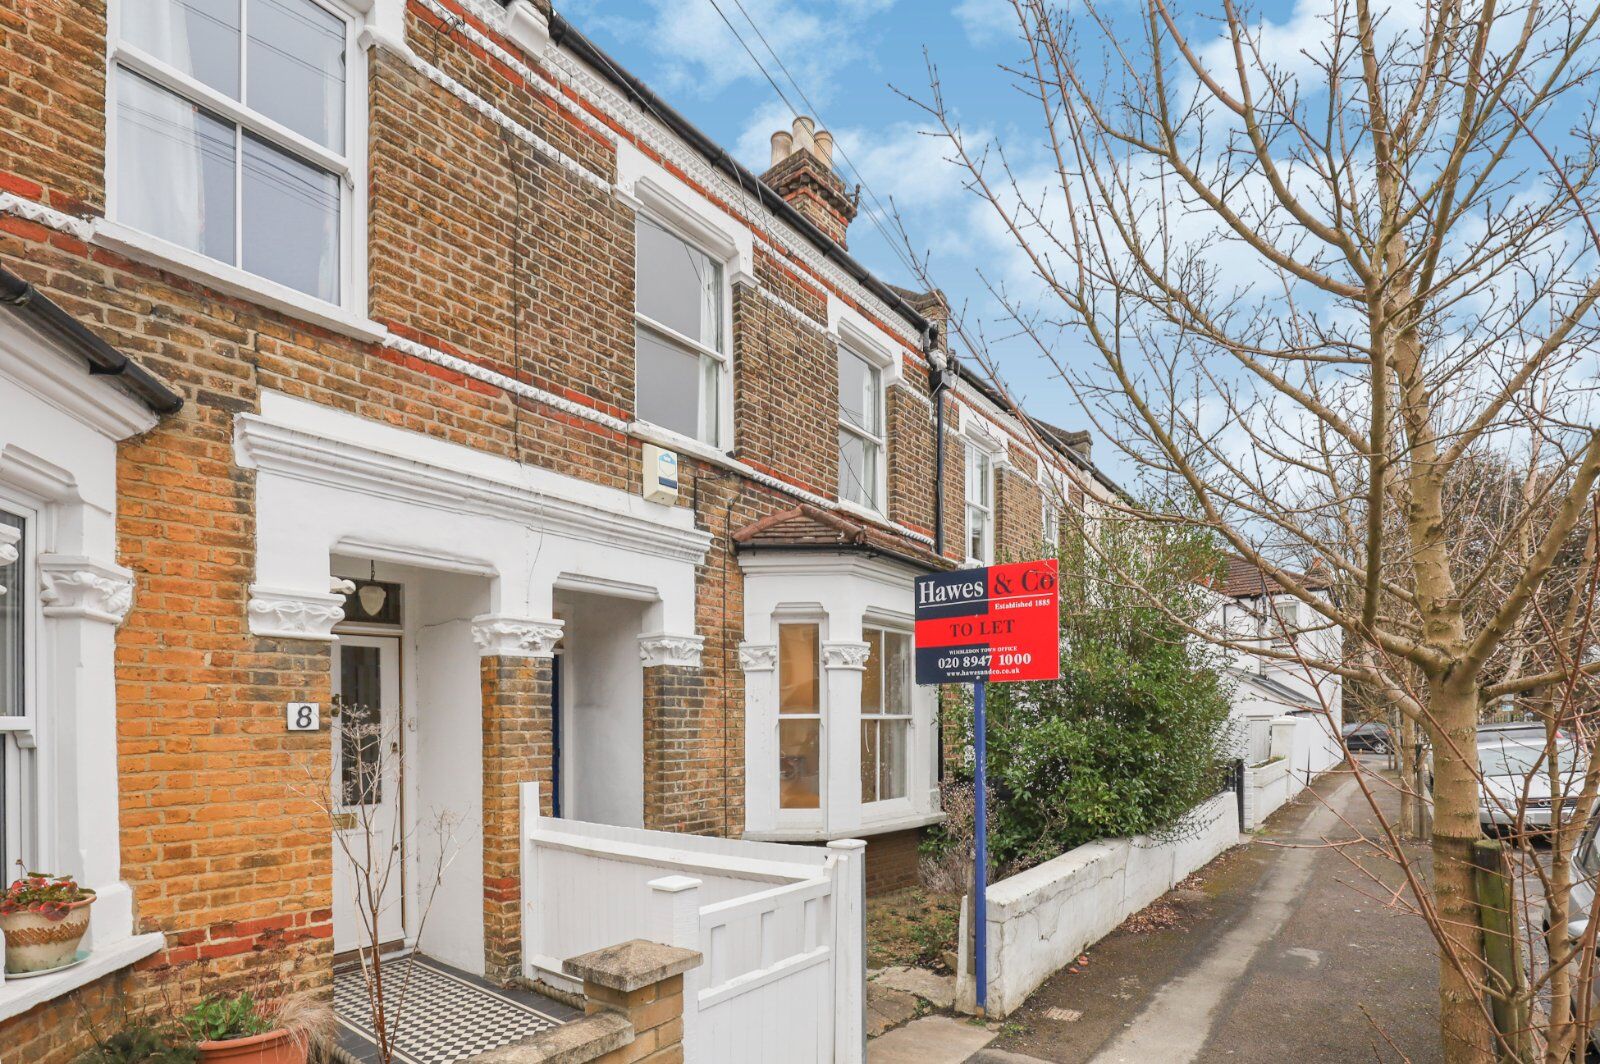 3 bedroom mid terraced house for sale Goodenough Road, Wimbledon, SW19, main image